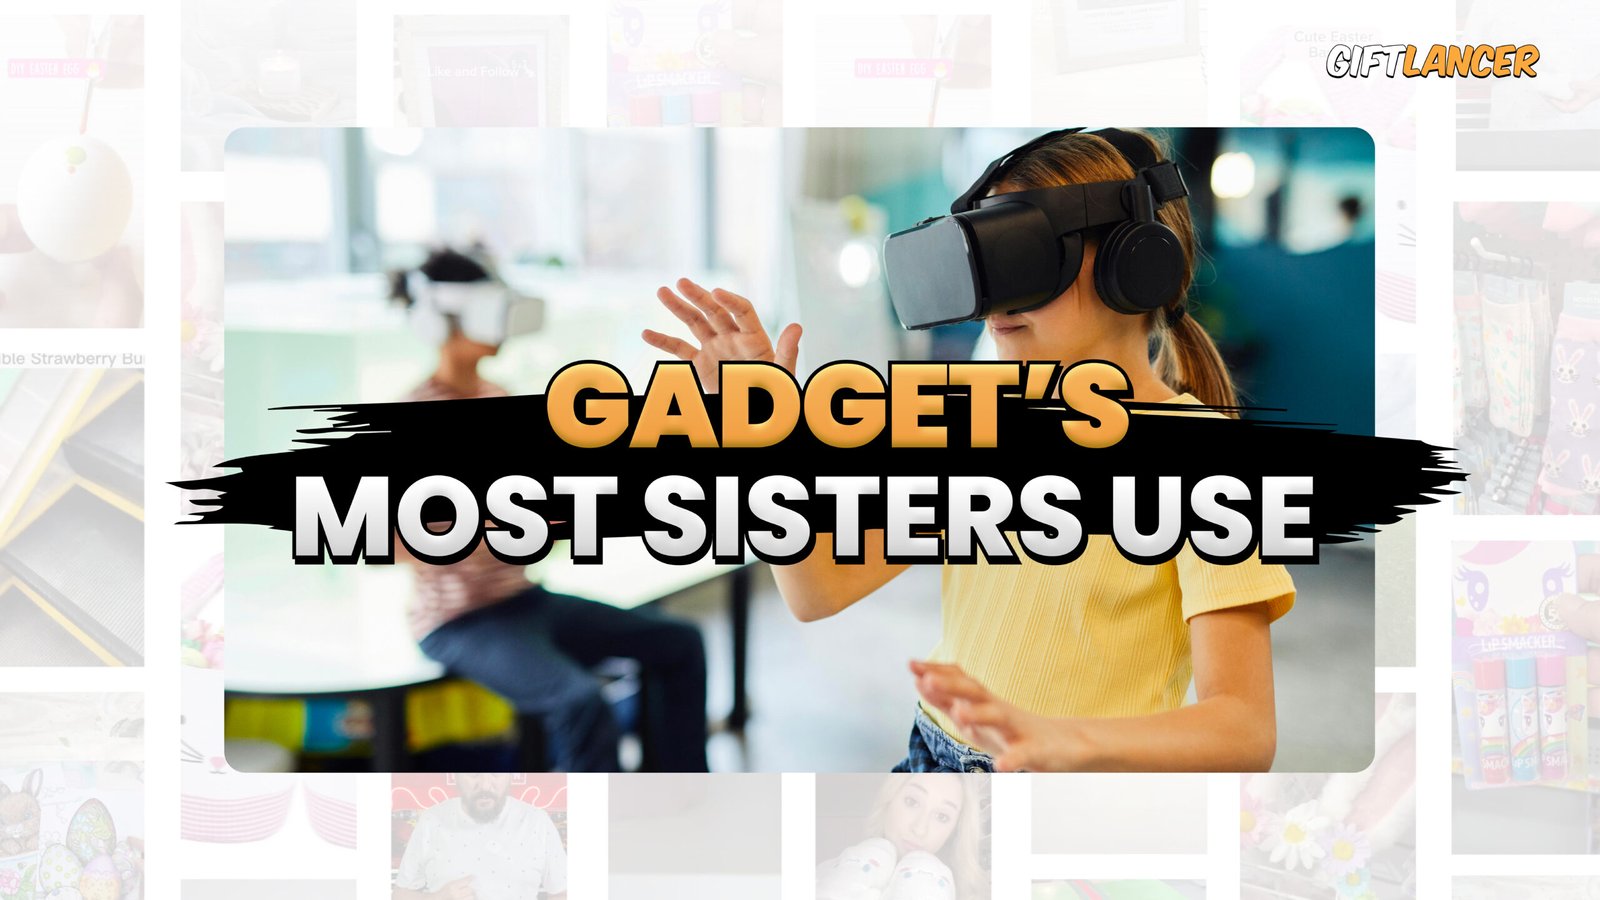 15 Electronic Gift Ideas for Your Sister Shared by a Tech Enthusiast: No. 9 is Perfect for Her Fitness Journey